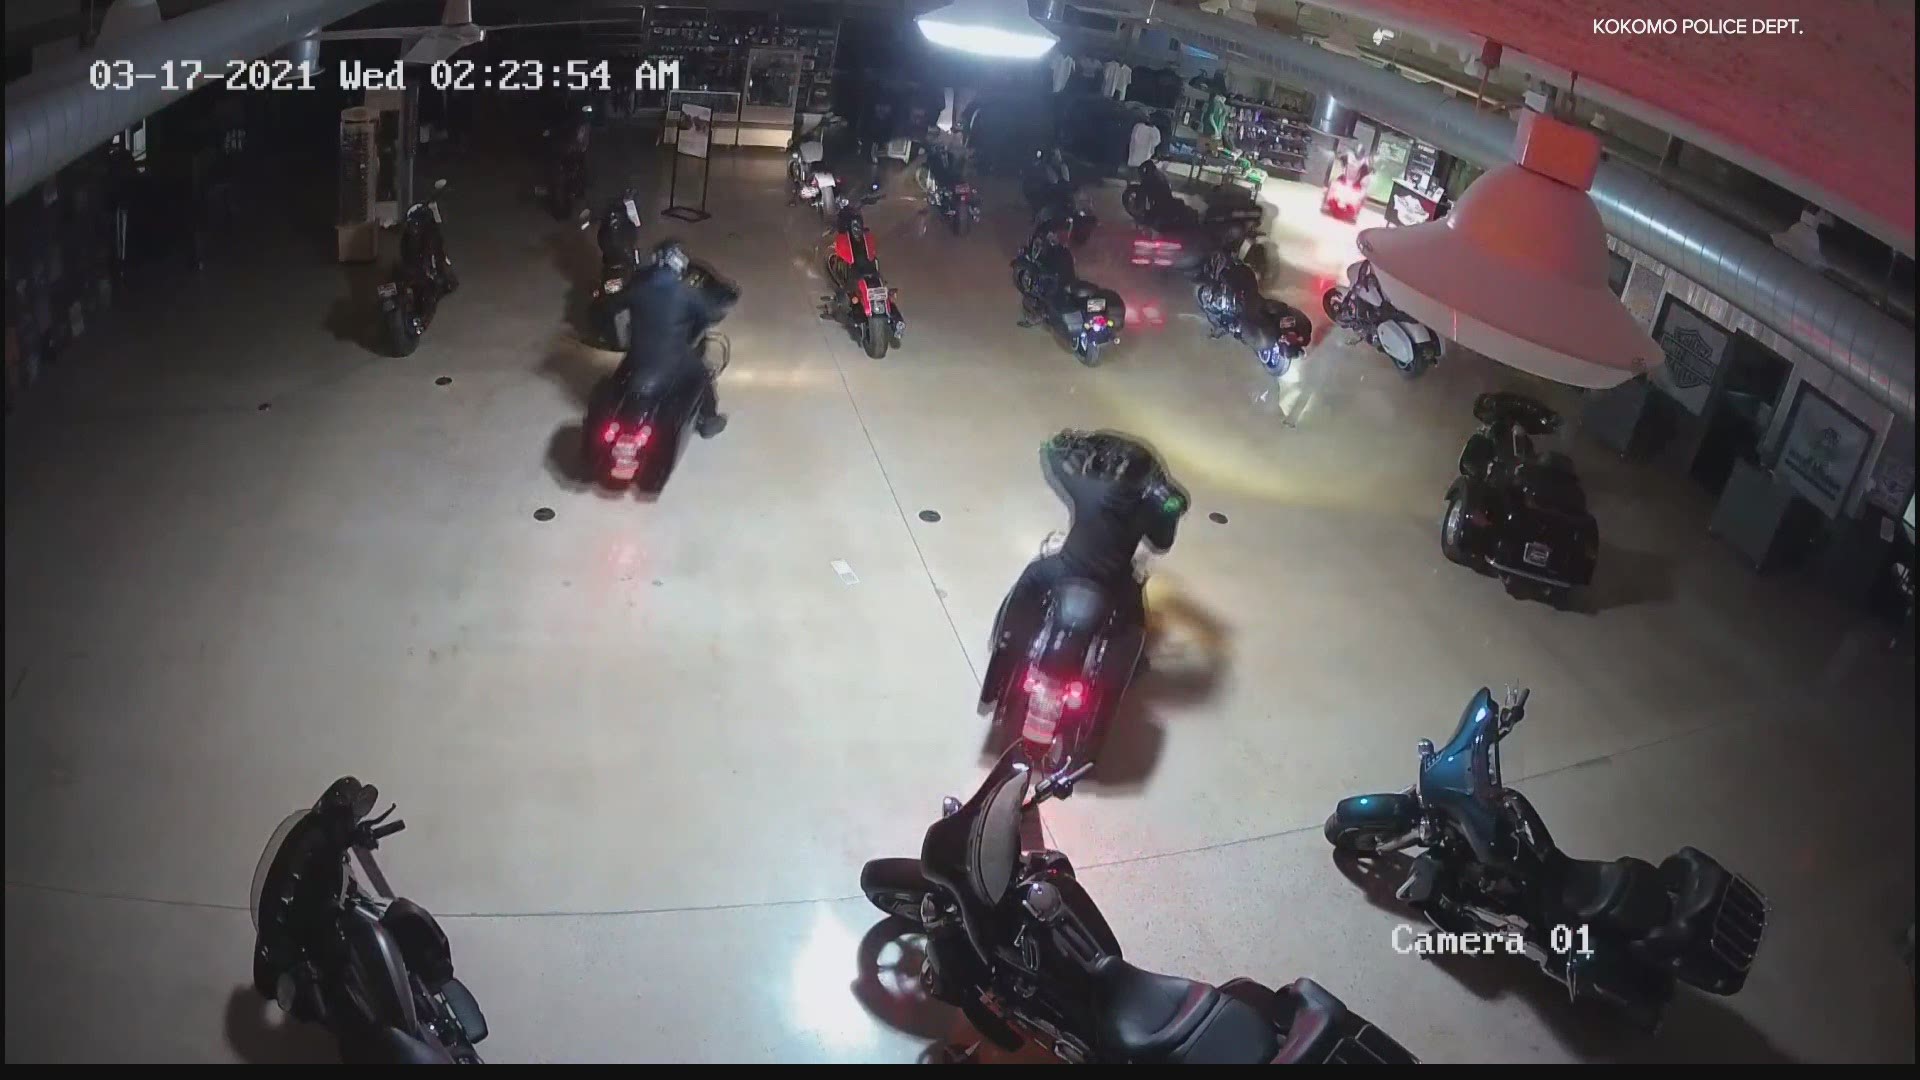 Four bikes worth a total of $95,000 are missing.